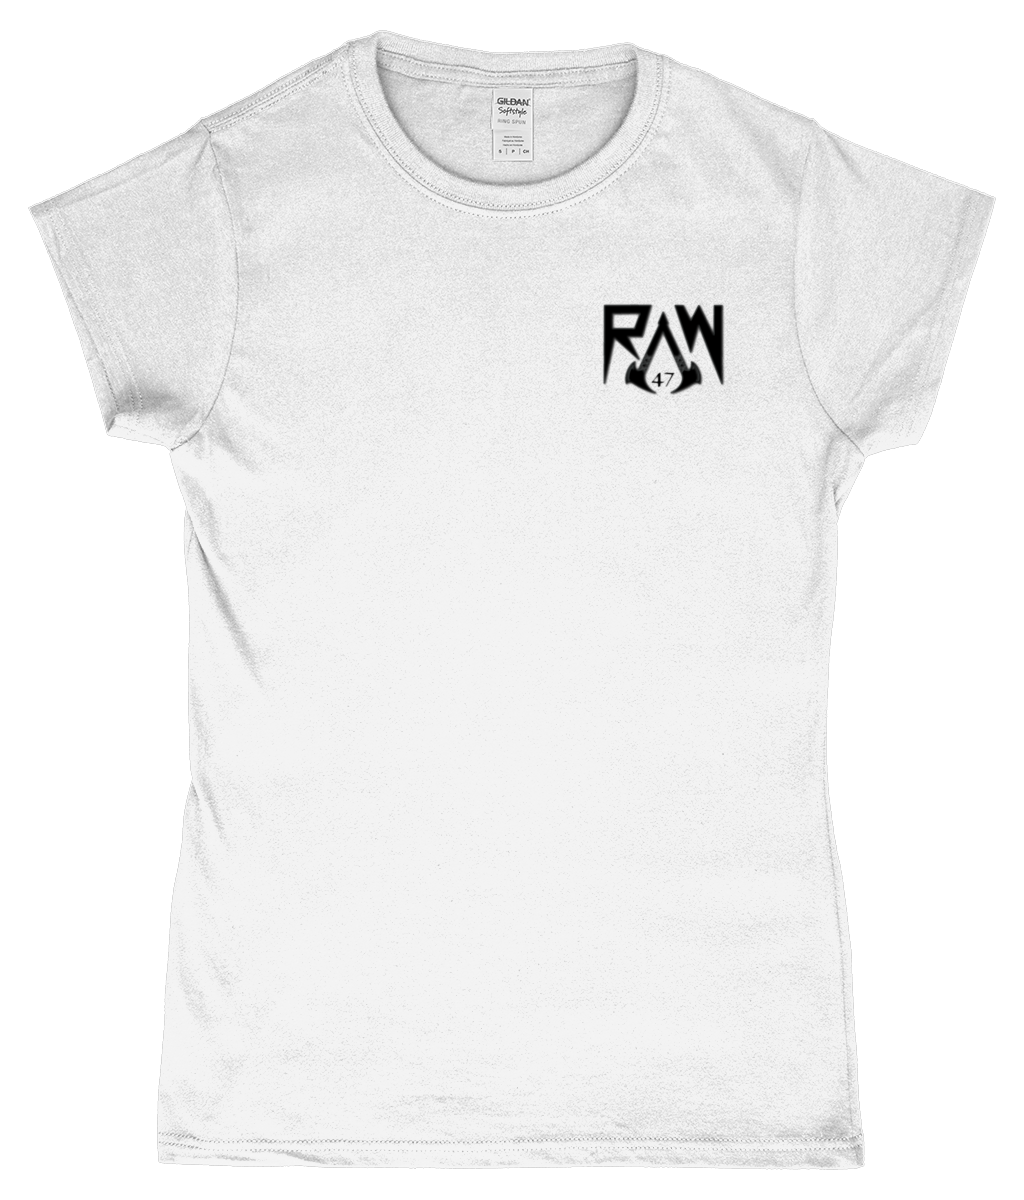 RAW47 Soft-Style Ladies Fitted T-Shirt